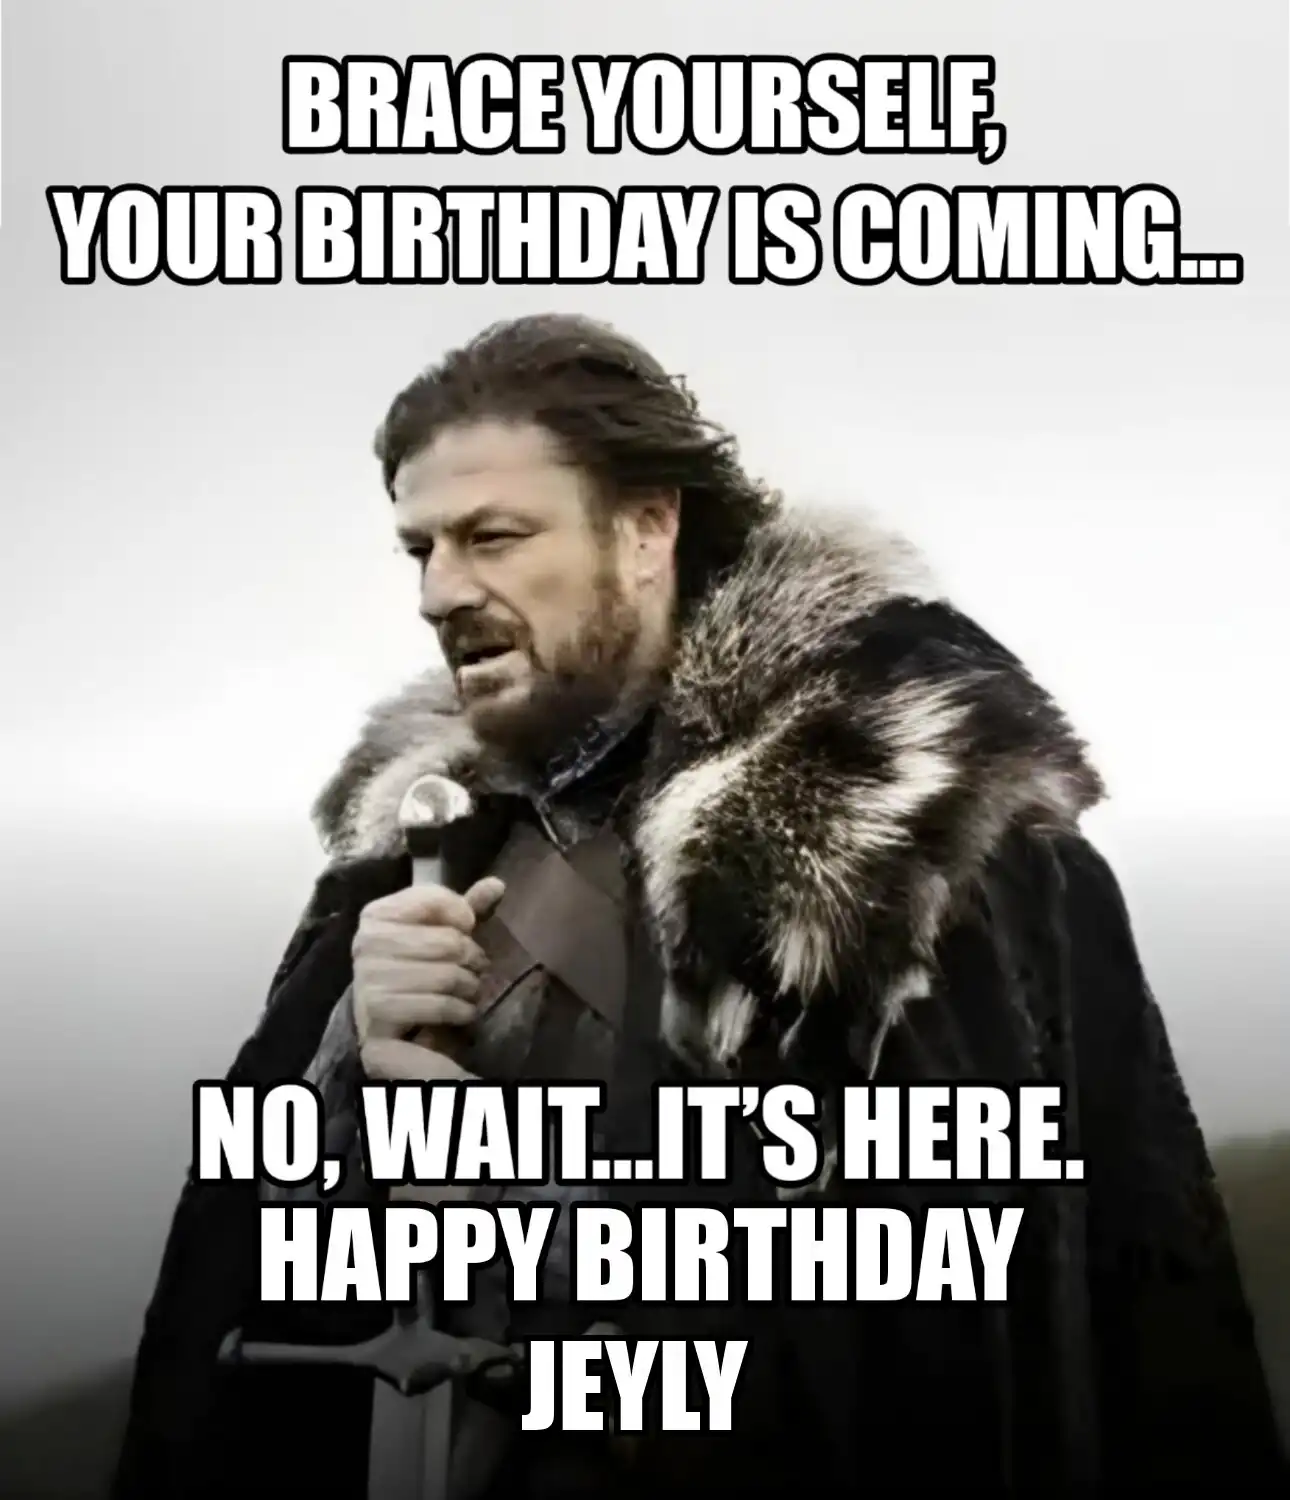 Happy Birthday Jeyly Brace Yourself Your Birthday Is Coming Meme